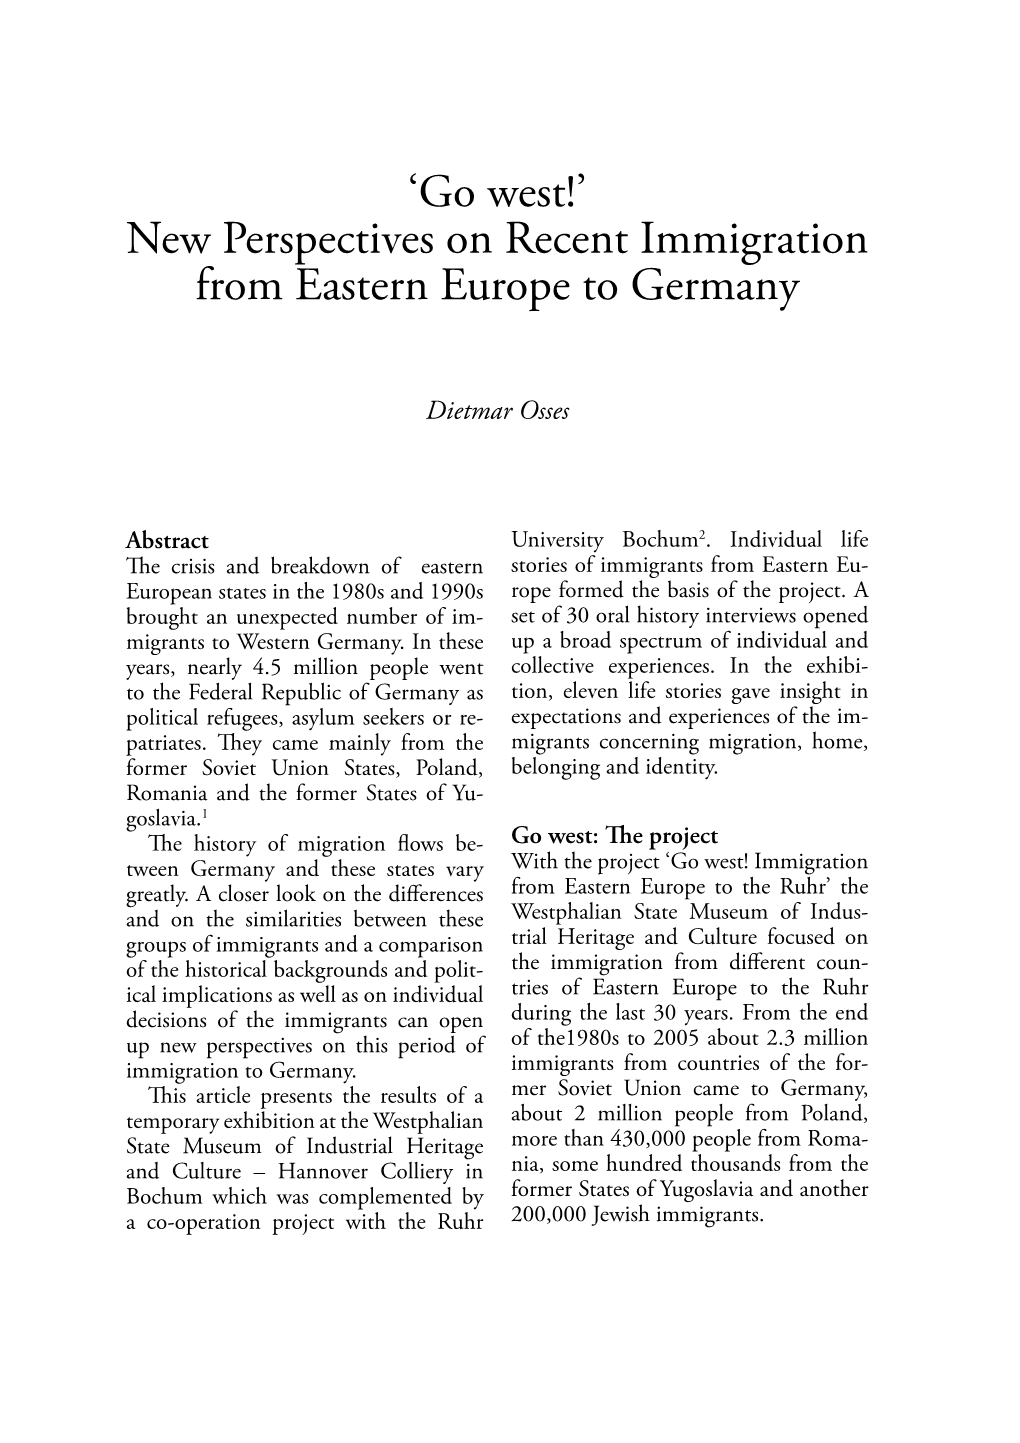 New Perspectives on Recent Immigration from Eastern Europe to Germany